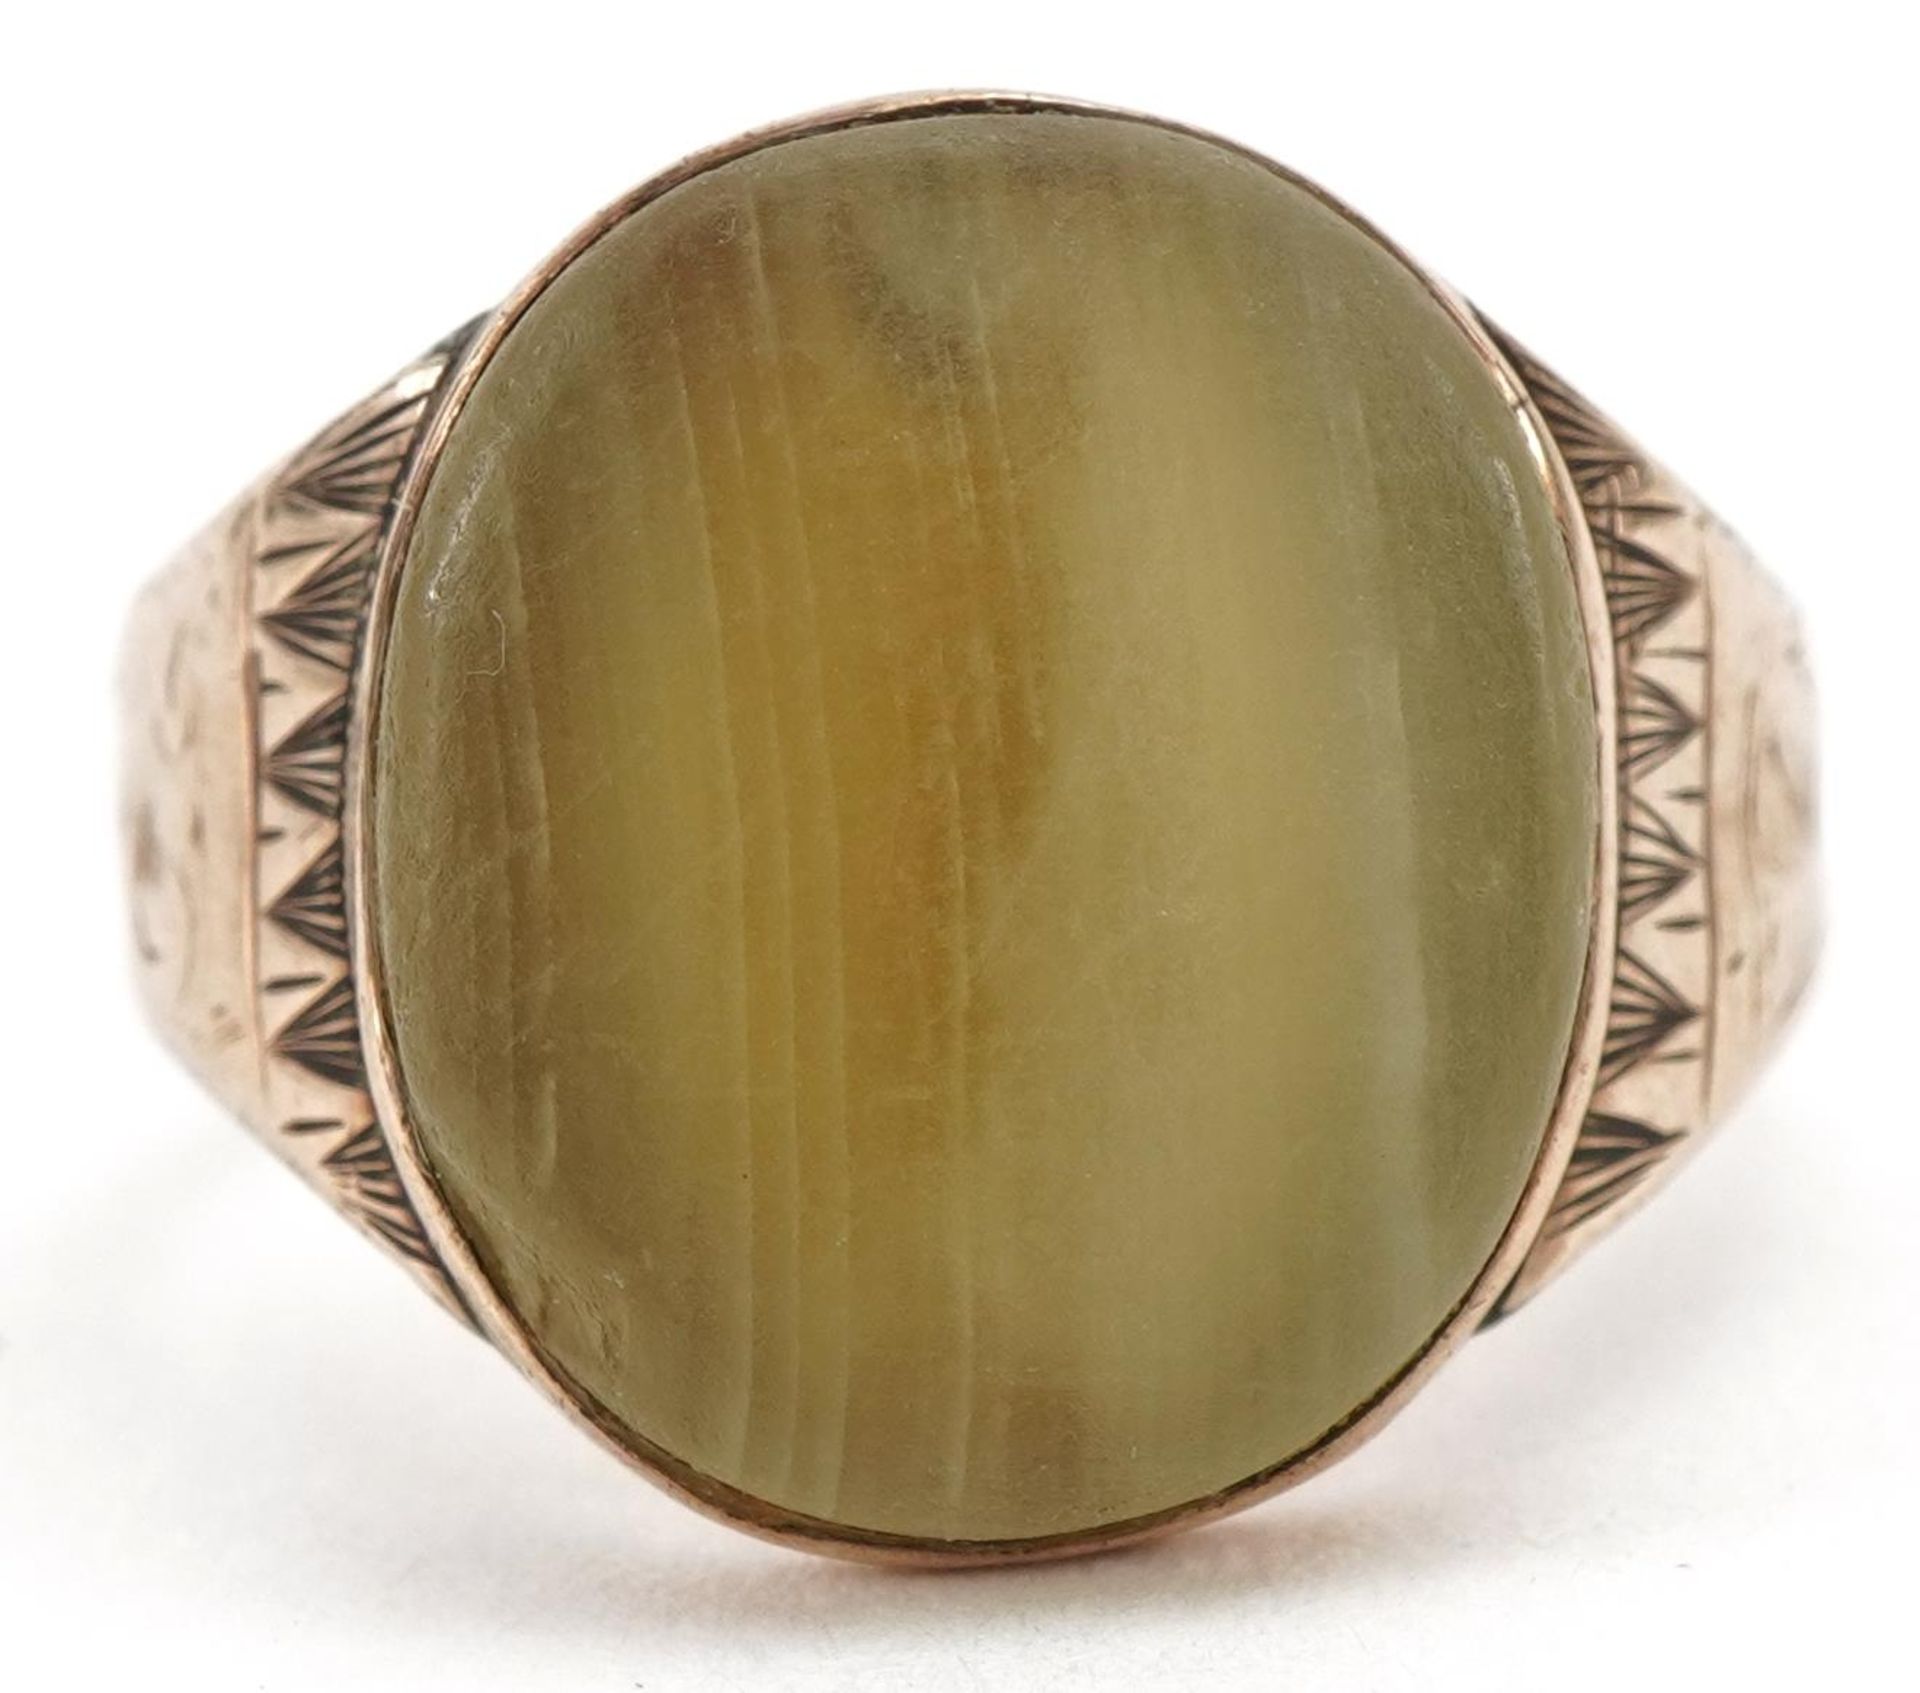 Antique rose gold green onyx signet ring with engraved shoulders, possibly Georgian, the onyx